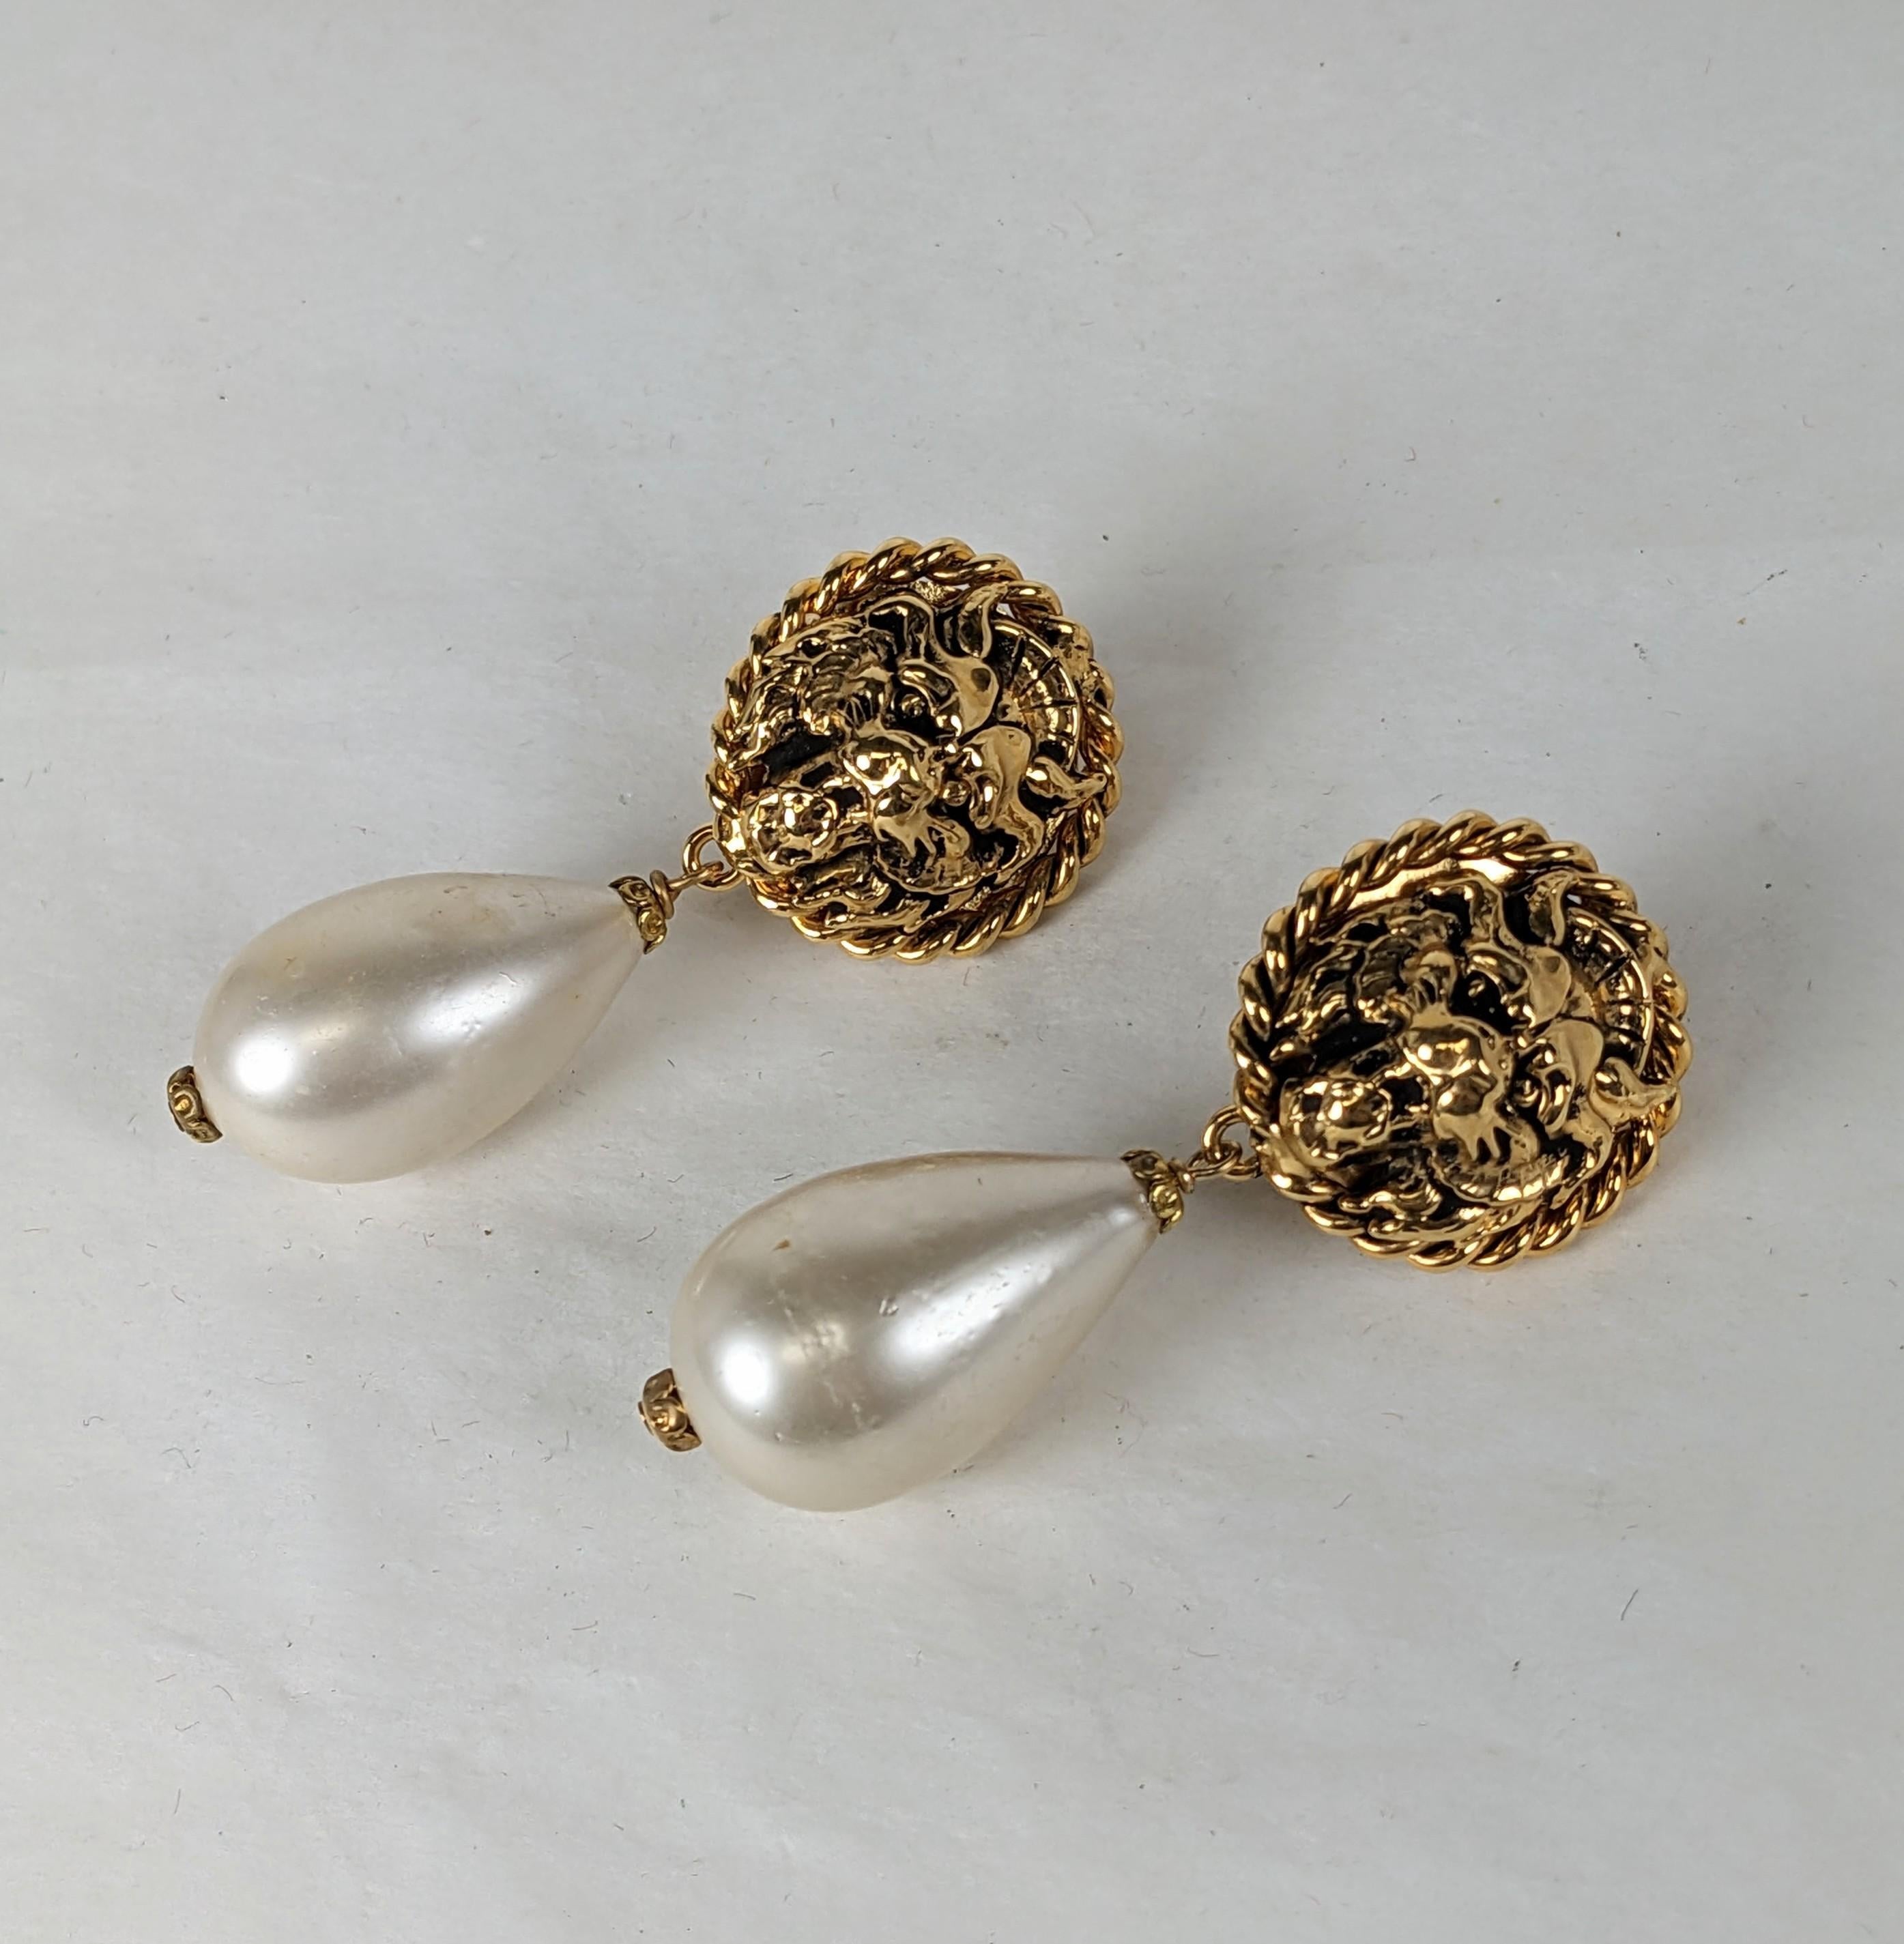 Chanel Iconic Lion and Pearl Drop Earrings from the 1980's. Gilt lion head motif on clip earrings with Gripoix faux pearl glass drops. Unsigned, 1980's France.
2.25